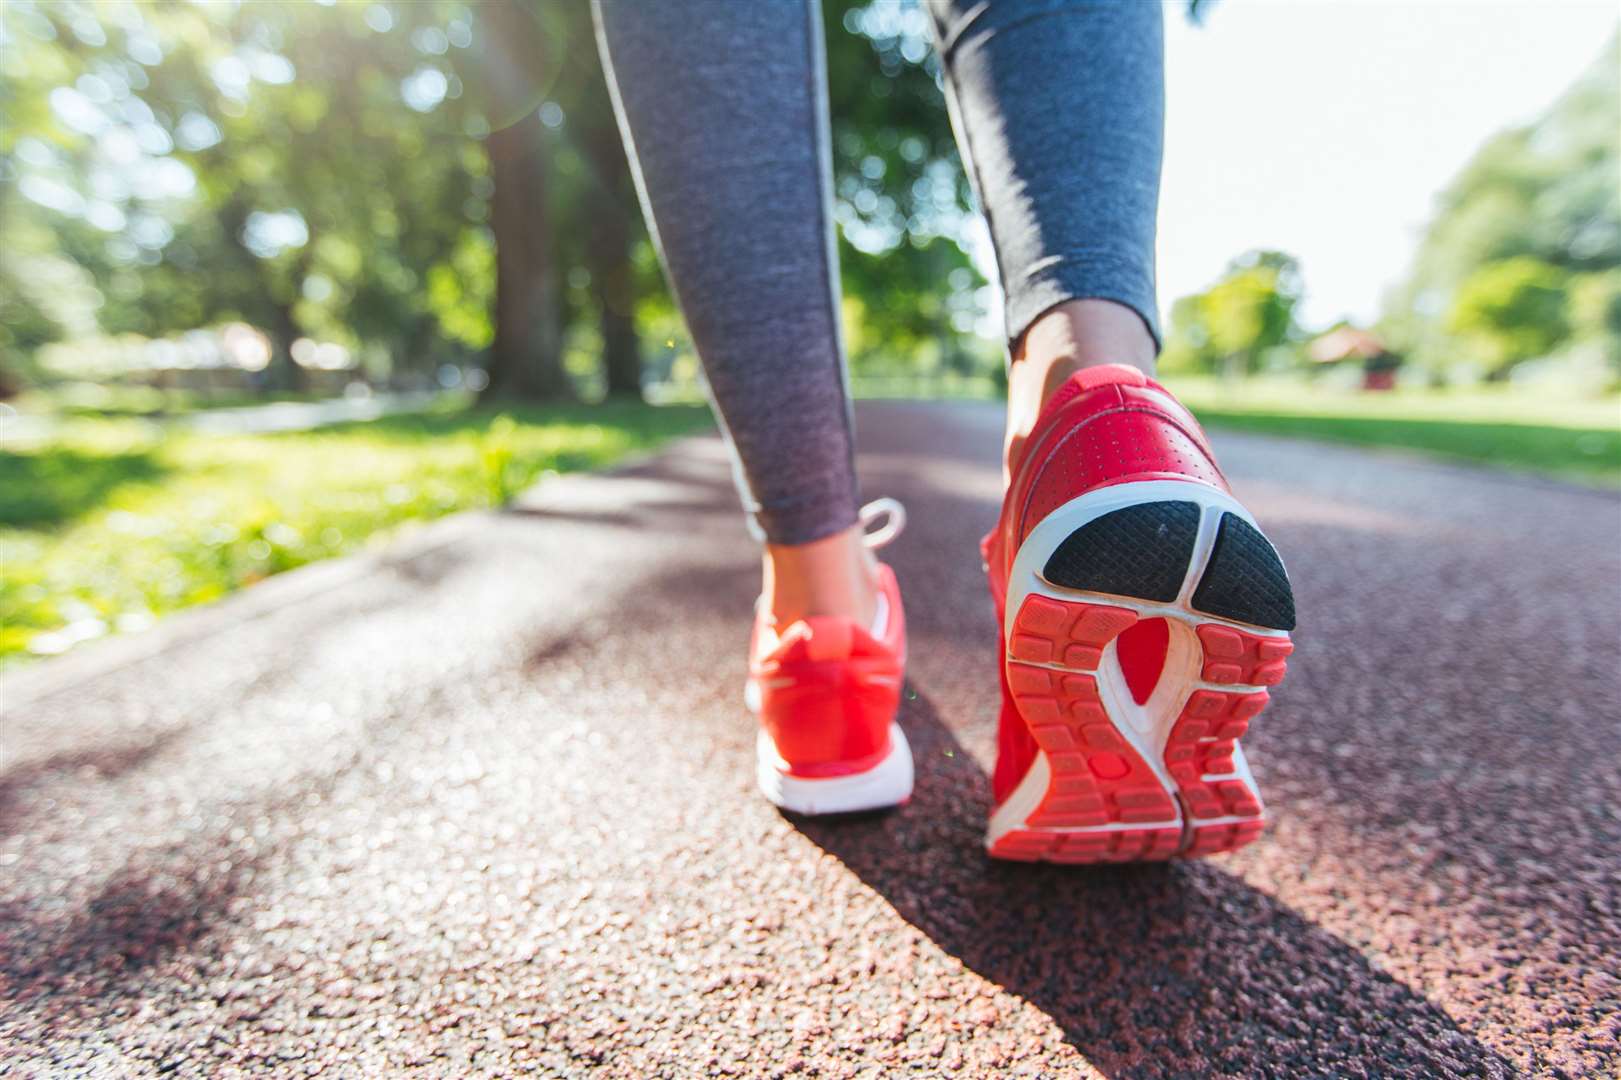 Where will you go running? Picture: iStock